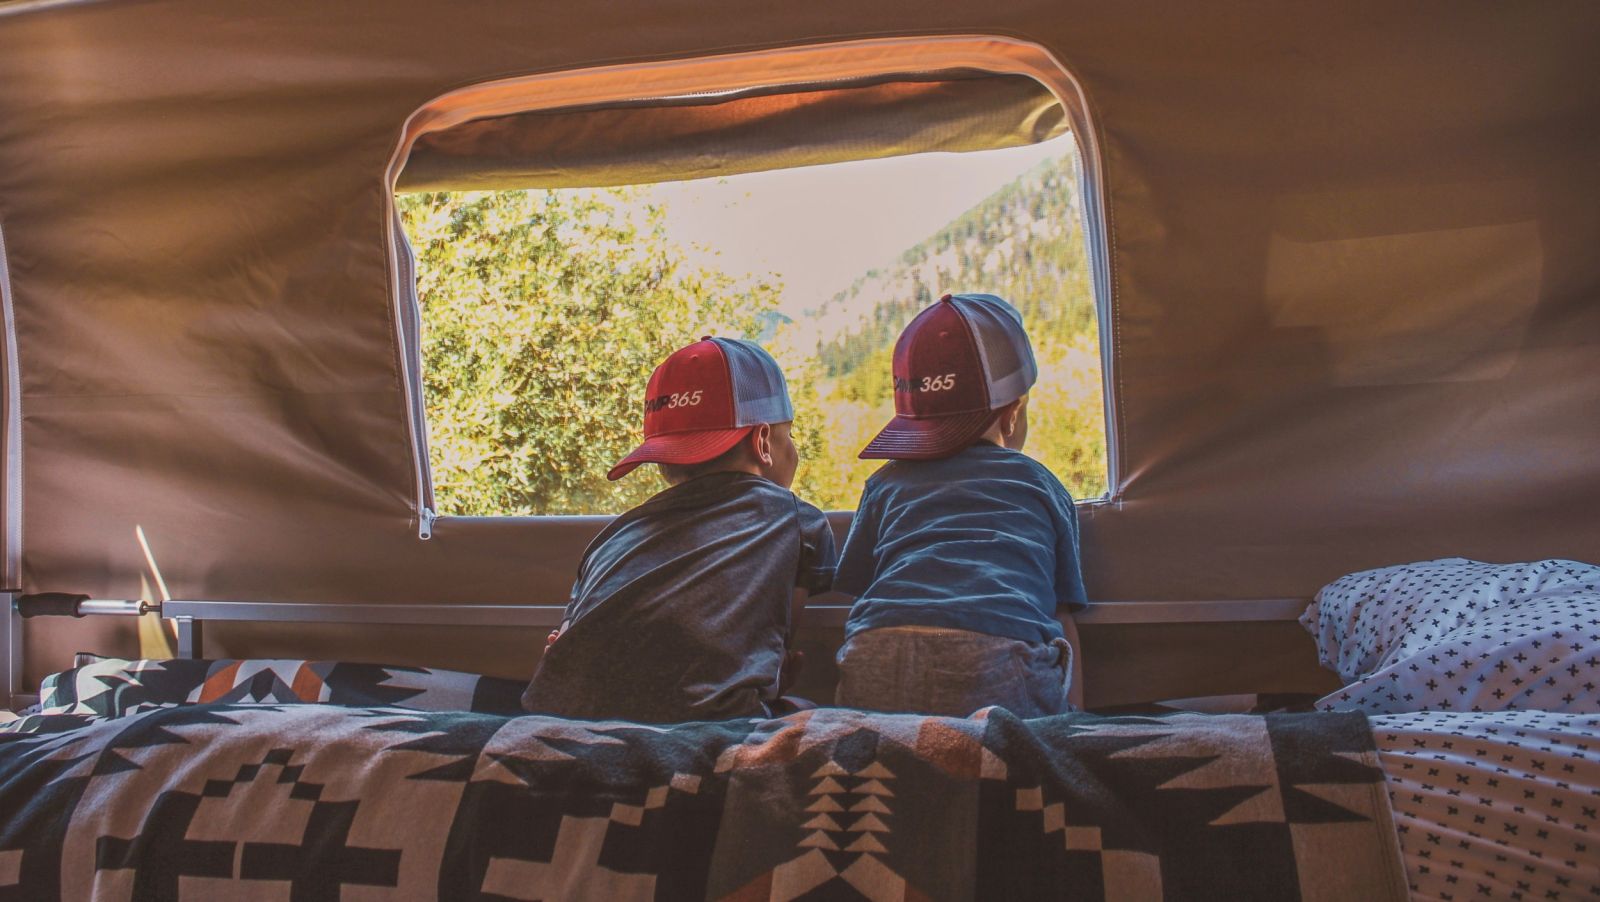 gosun and camp365 team up to show the glamping industry how things can and should be 10